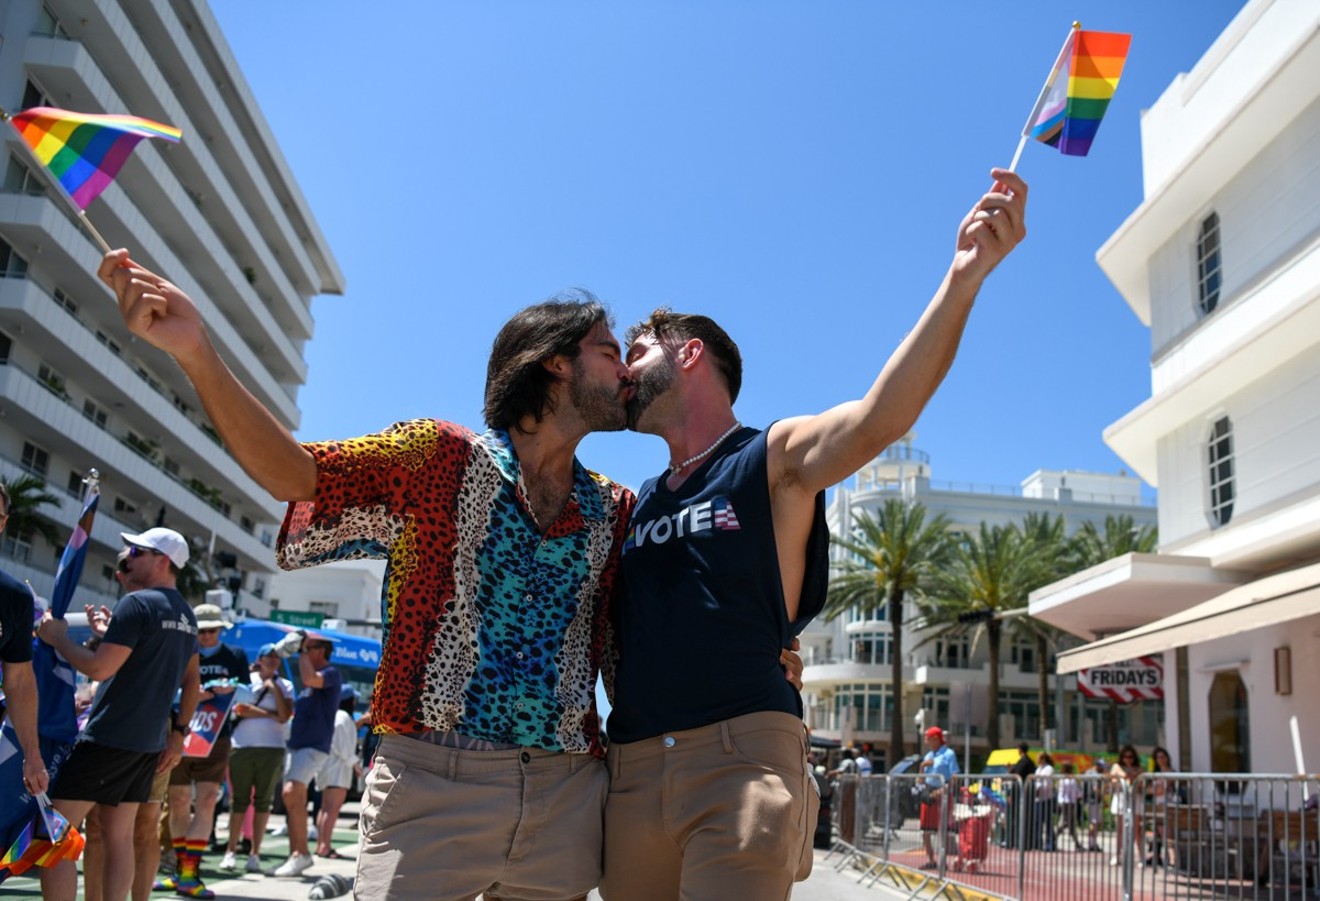 Miami Beach Pride's festival and parade take over Ocean Drive on Saturday, April 13, and Sunday, April 14.